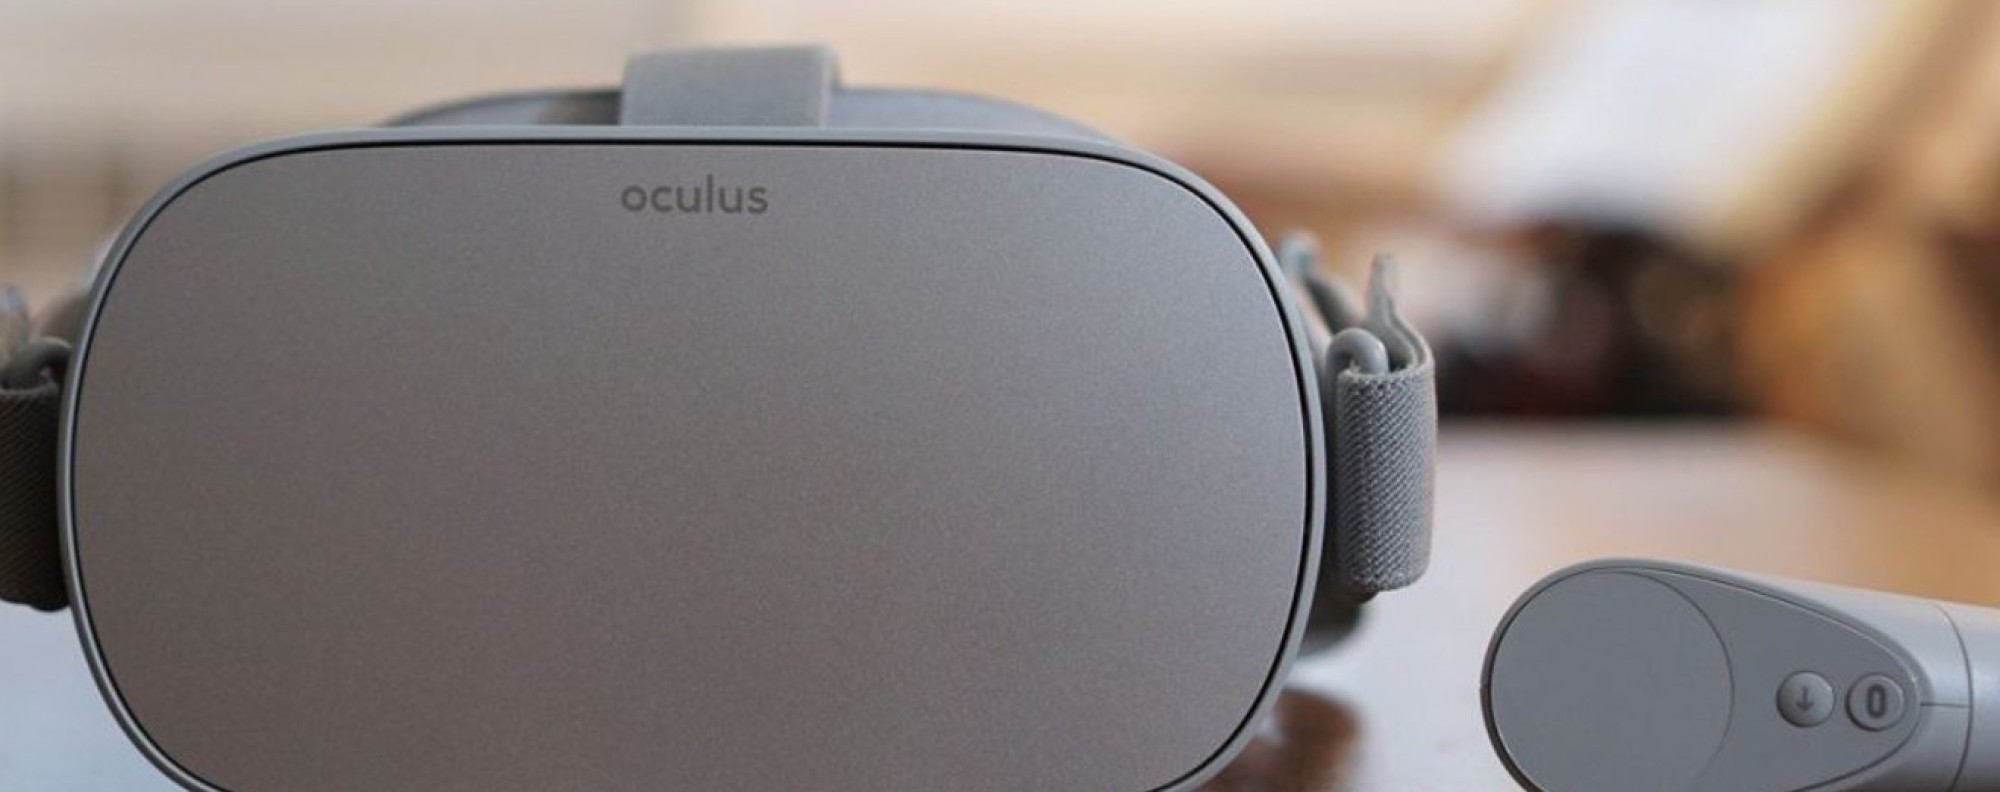 Oculus Go is the breakthrough VR headset you'll want to buy or